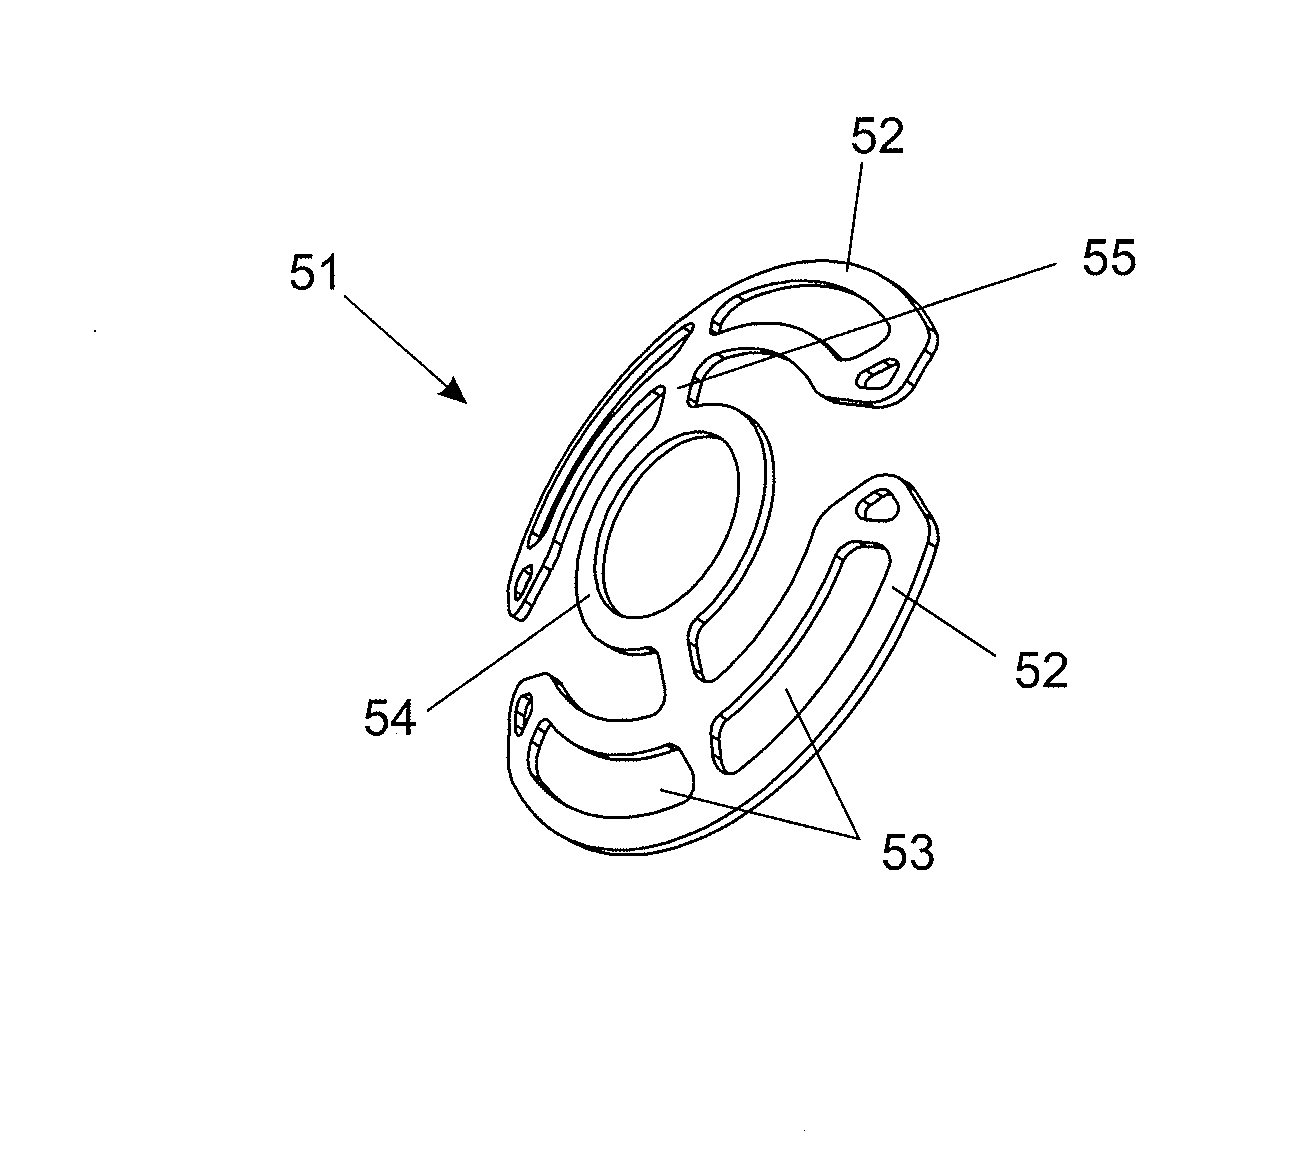 Implantable device for molding the curvature of the cornea